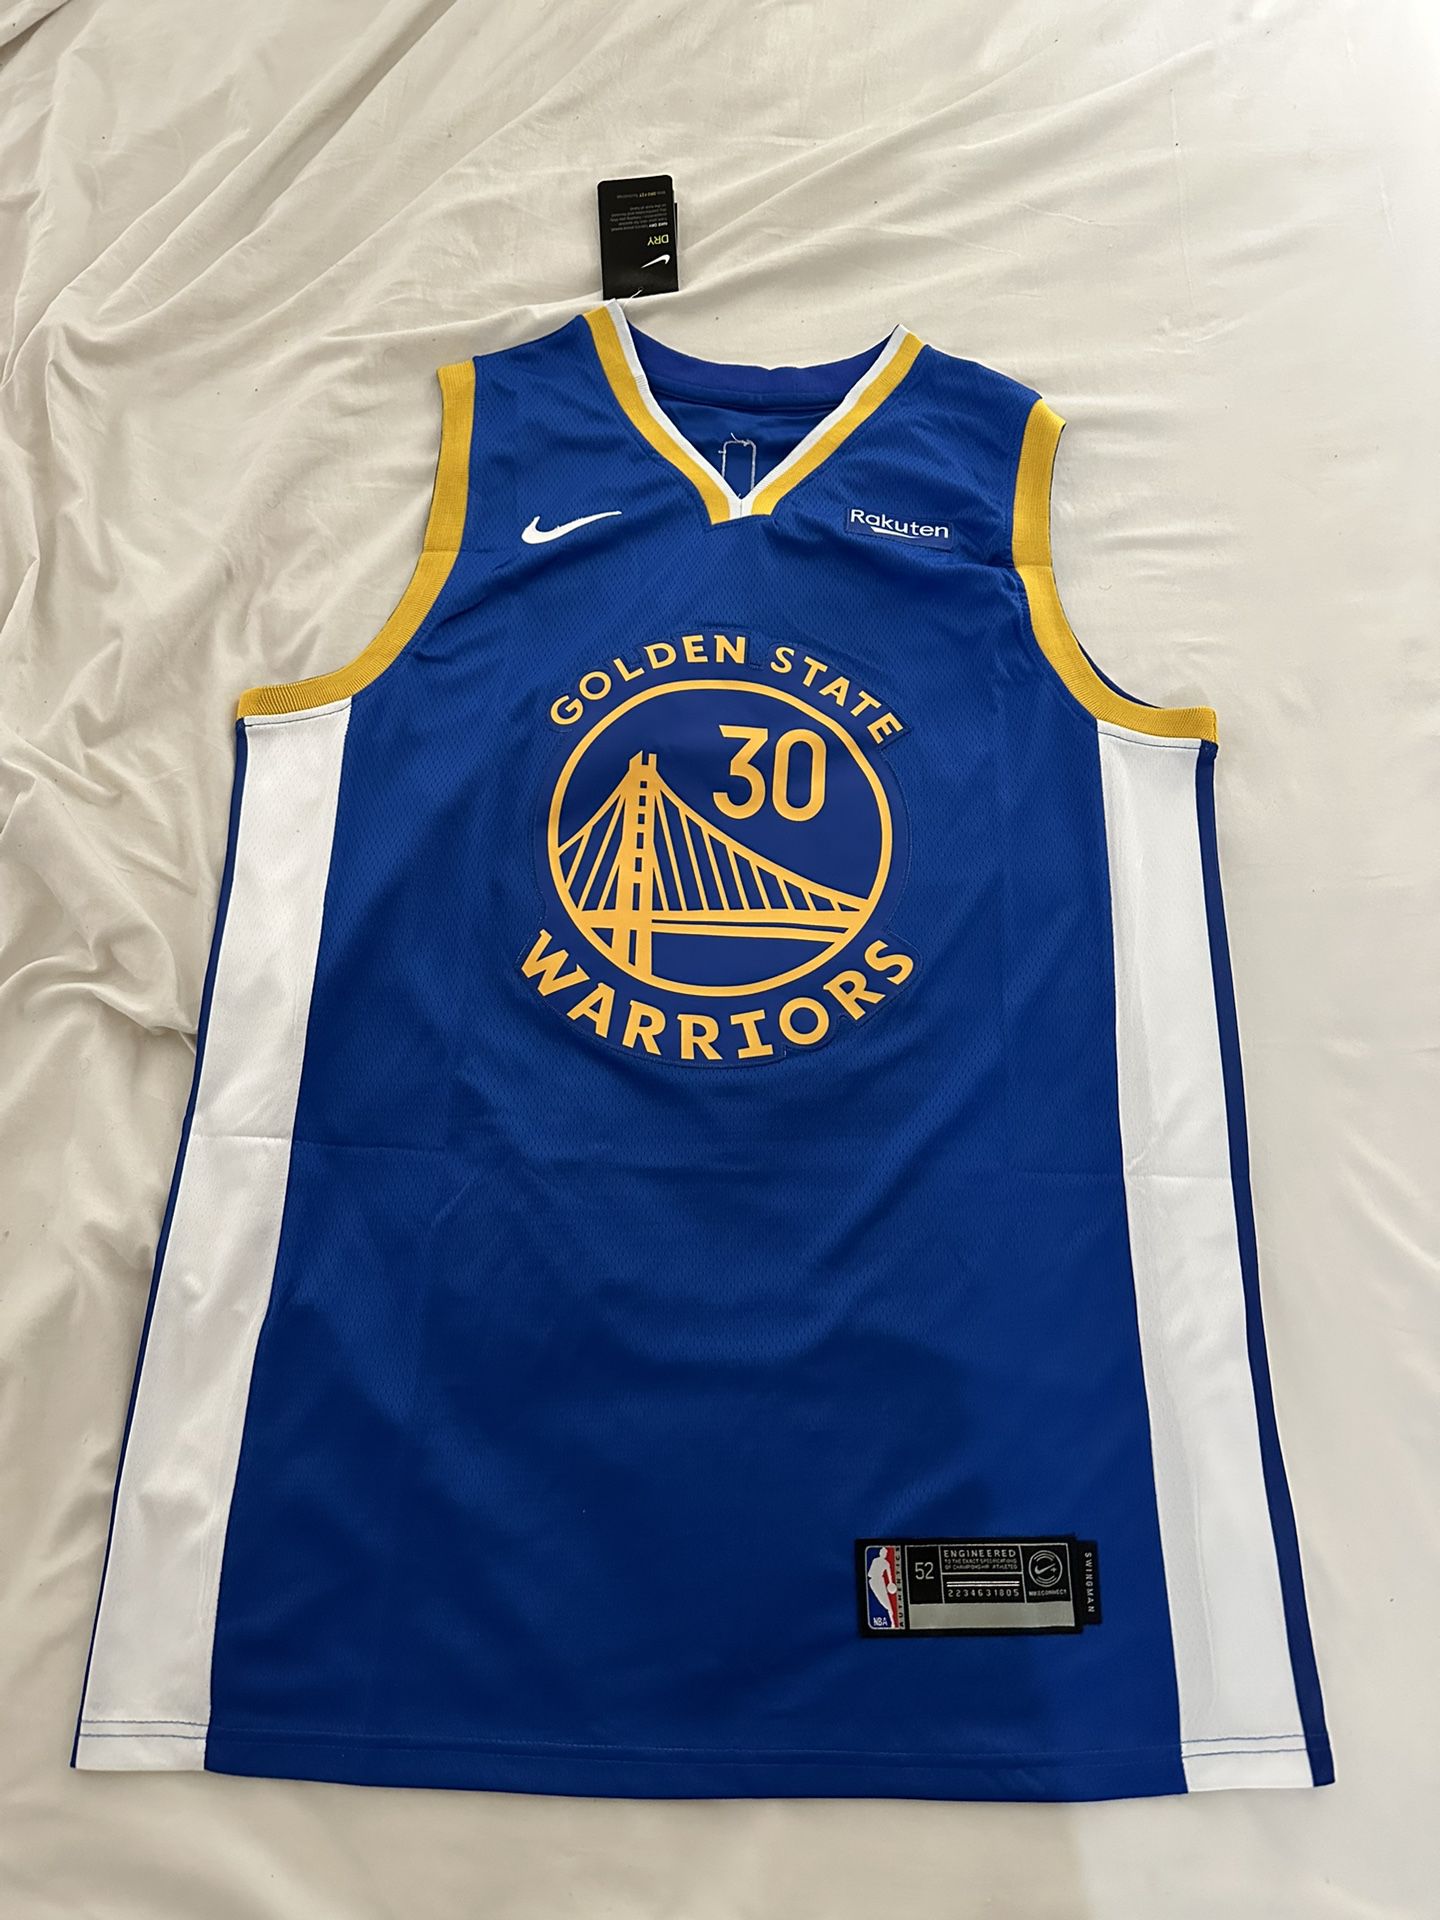 XL Stitched Steph Curry Warriors Jersey